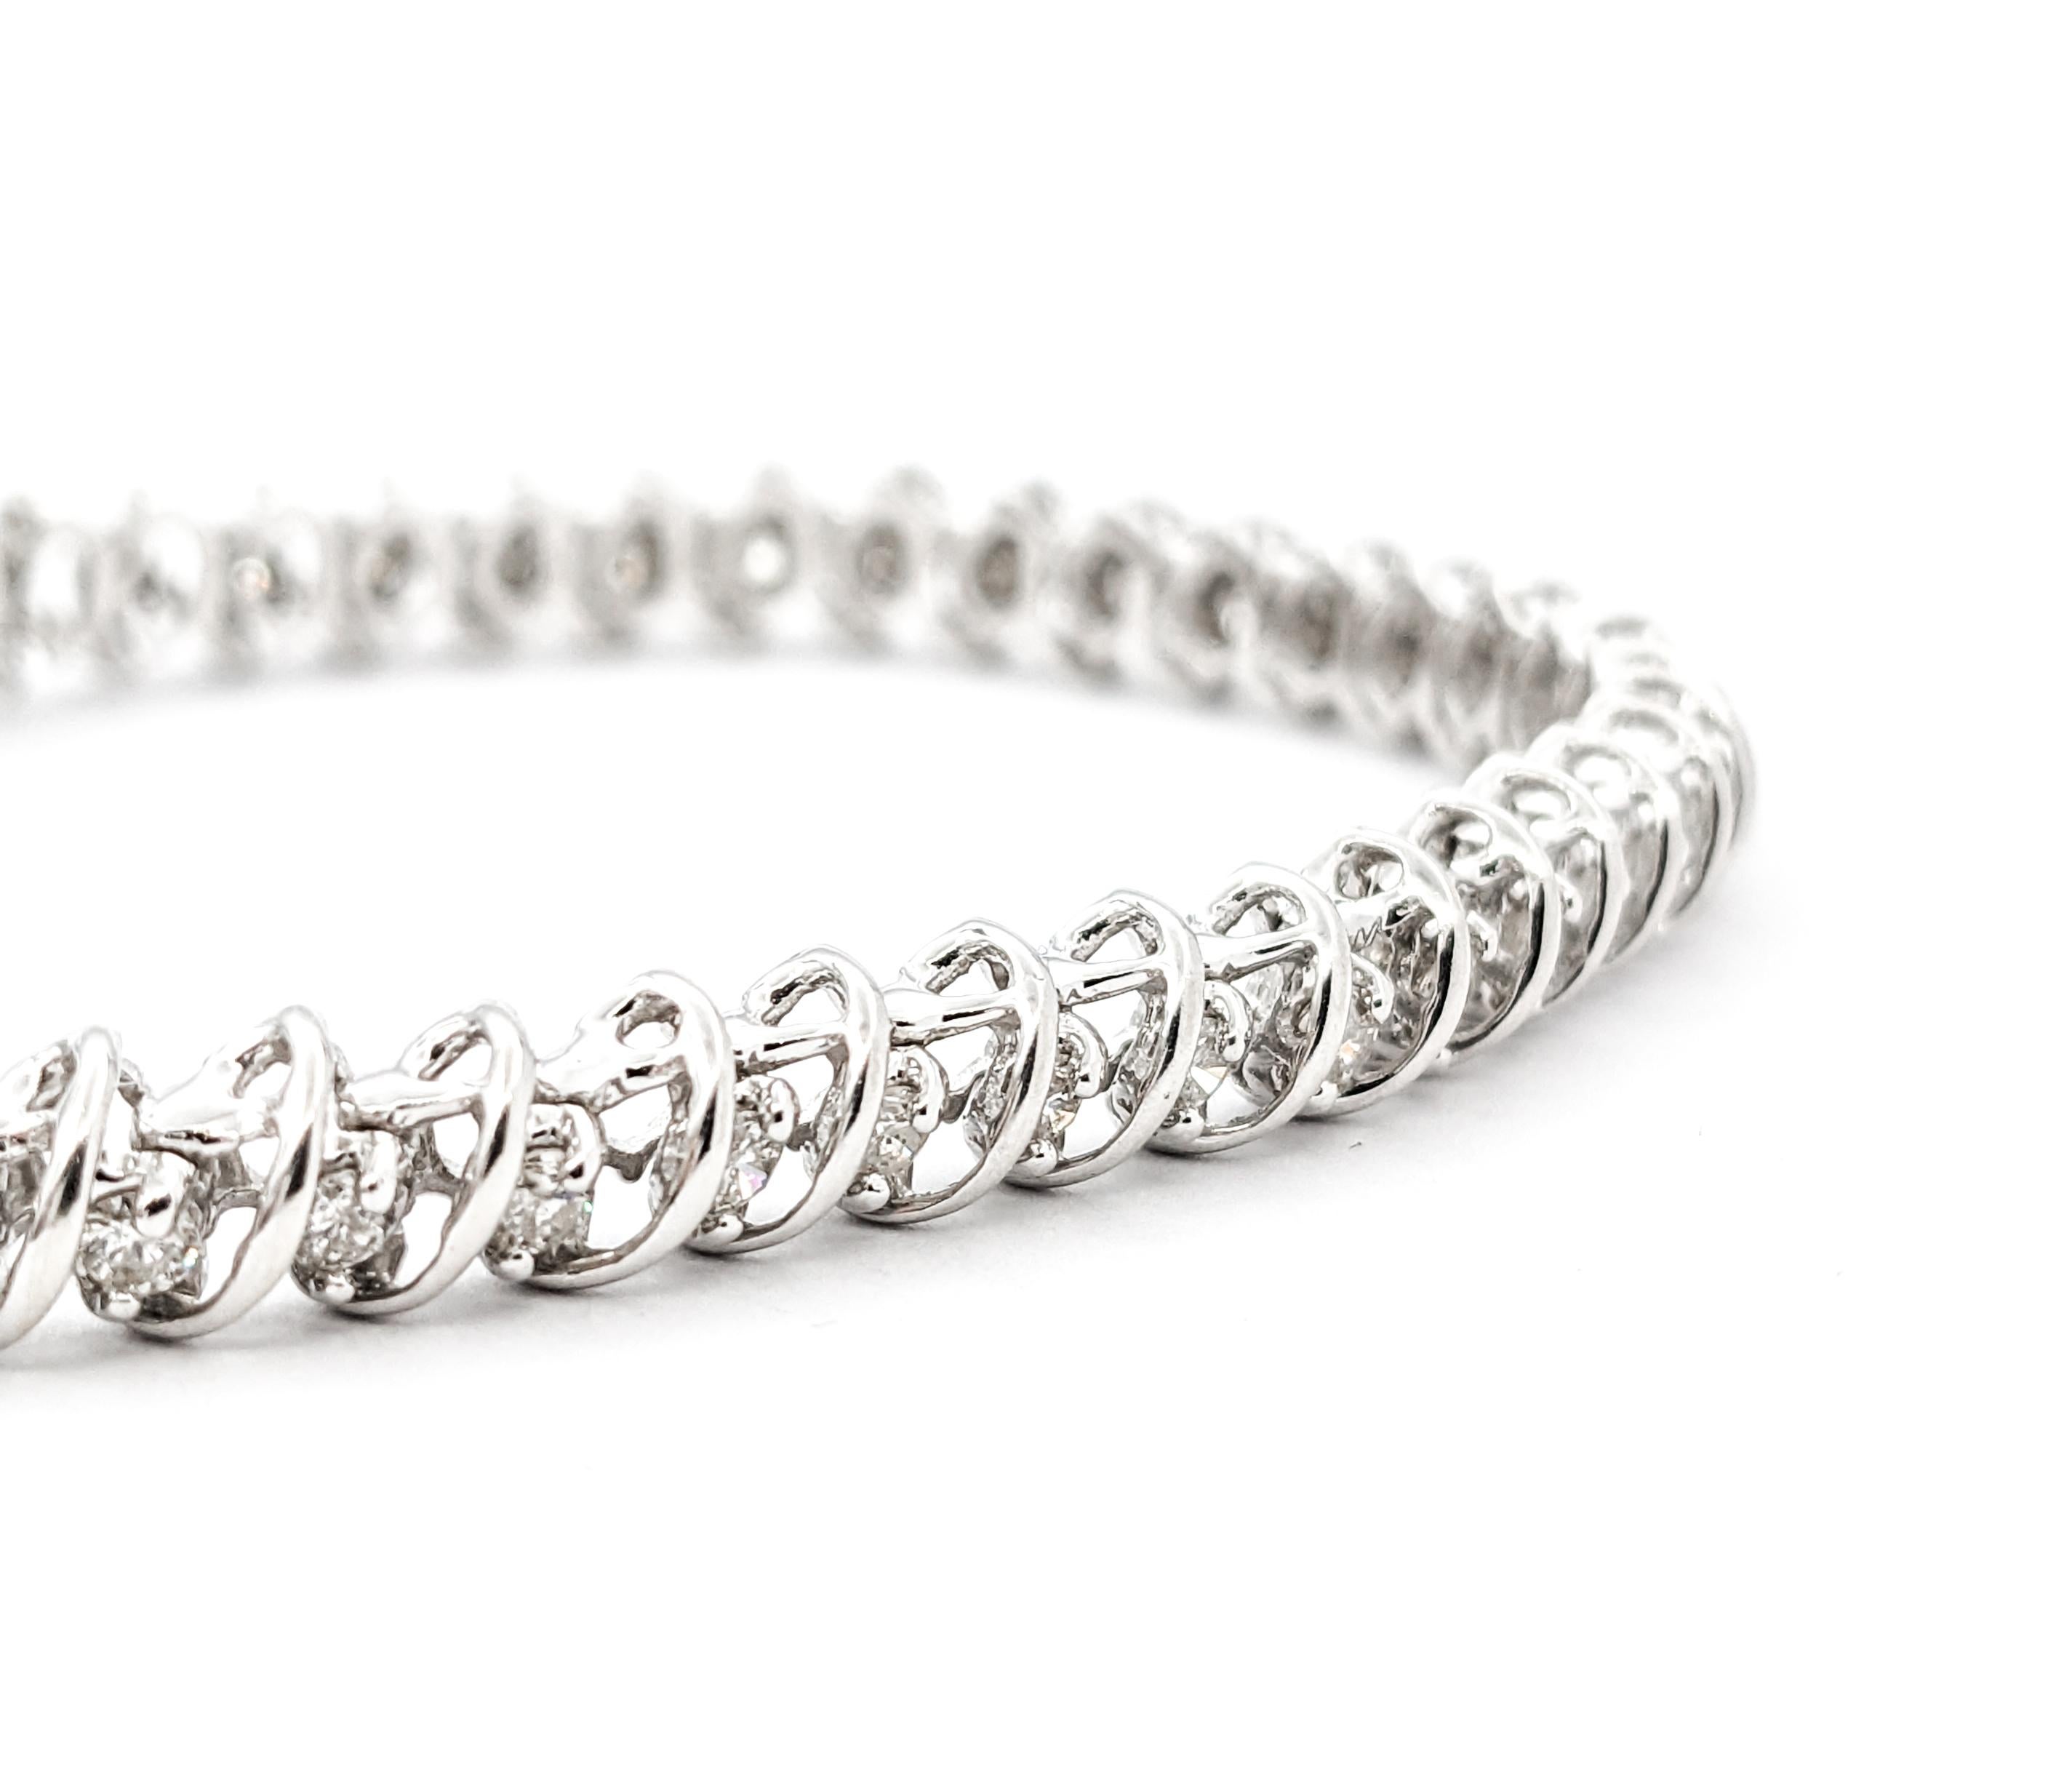 Glittering Diamond & 14K White Gold Tennis Bracelet

This beautiful bracelet is crafted in 14kt white gold and features 2.00ctw round brilliant-cut diamonds, I1 clarity and H-I color. This bracelet measures 7 inches; total weight is 13.56g.

14kt